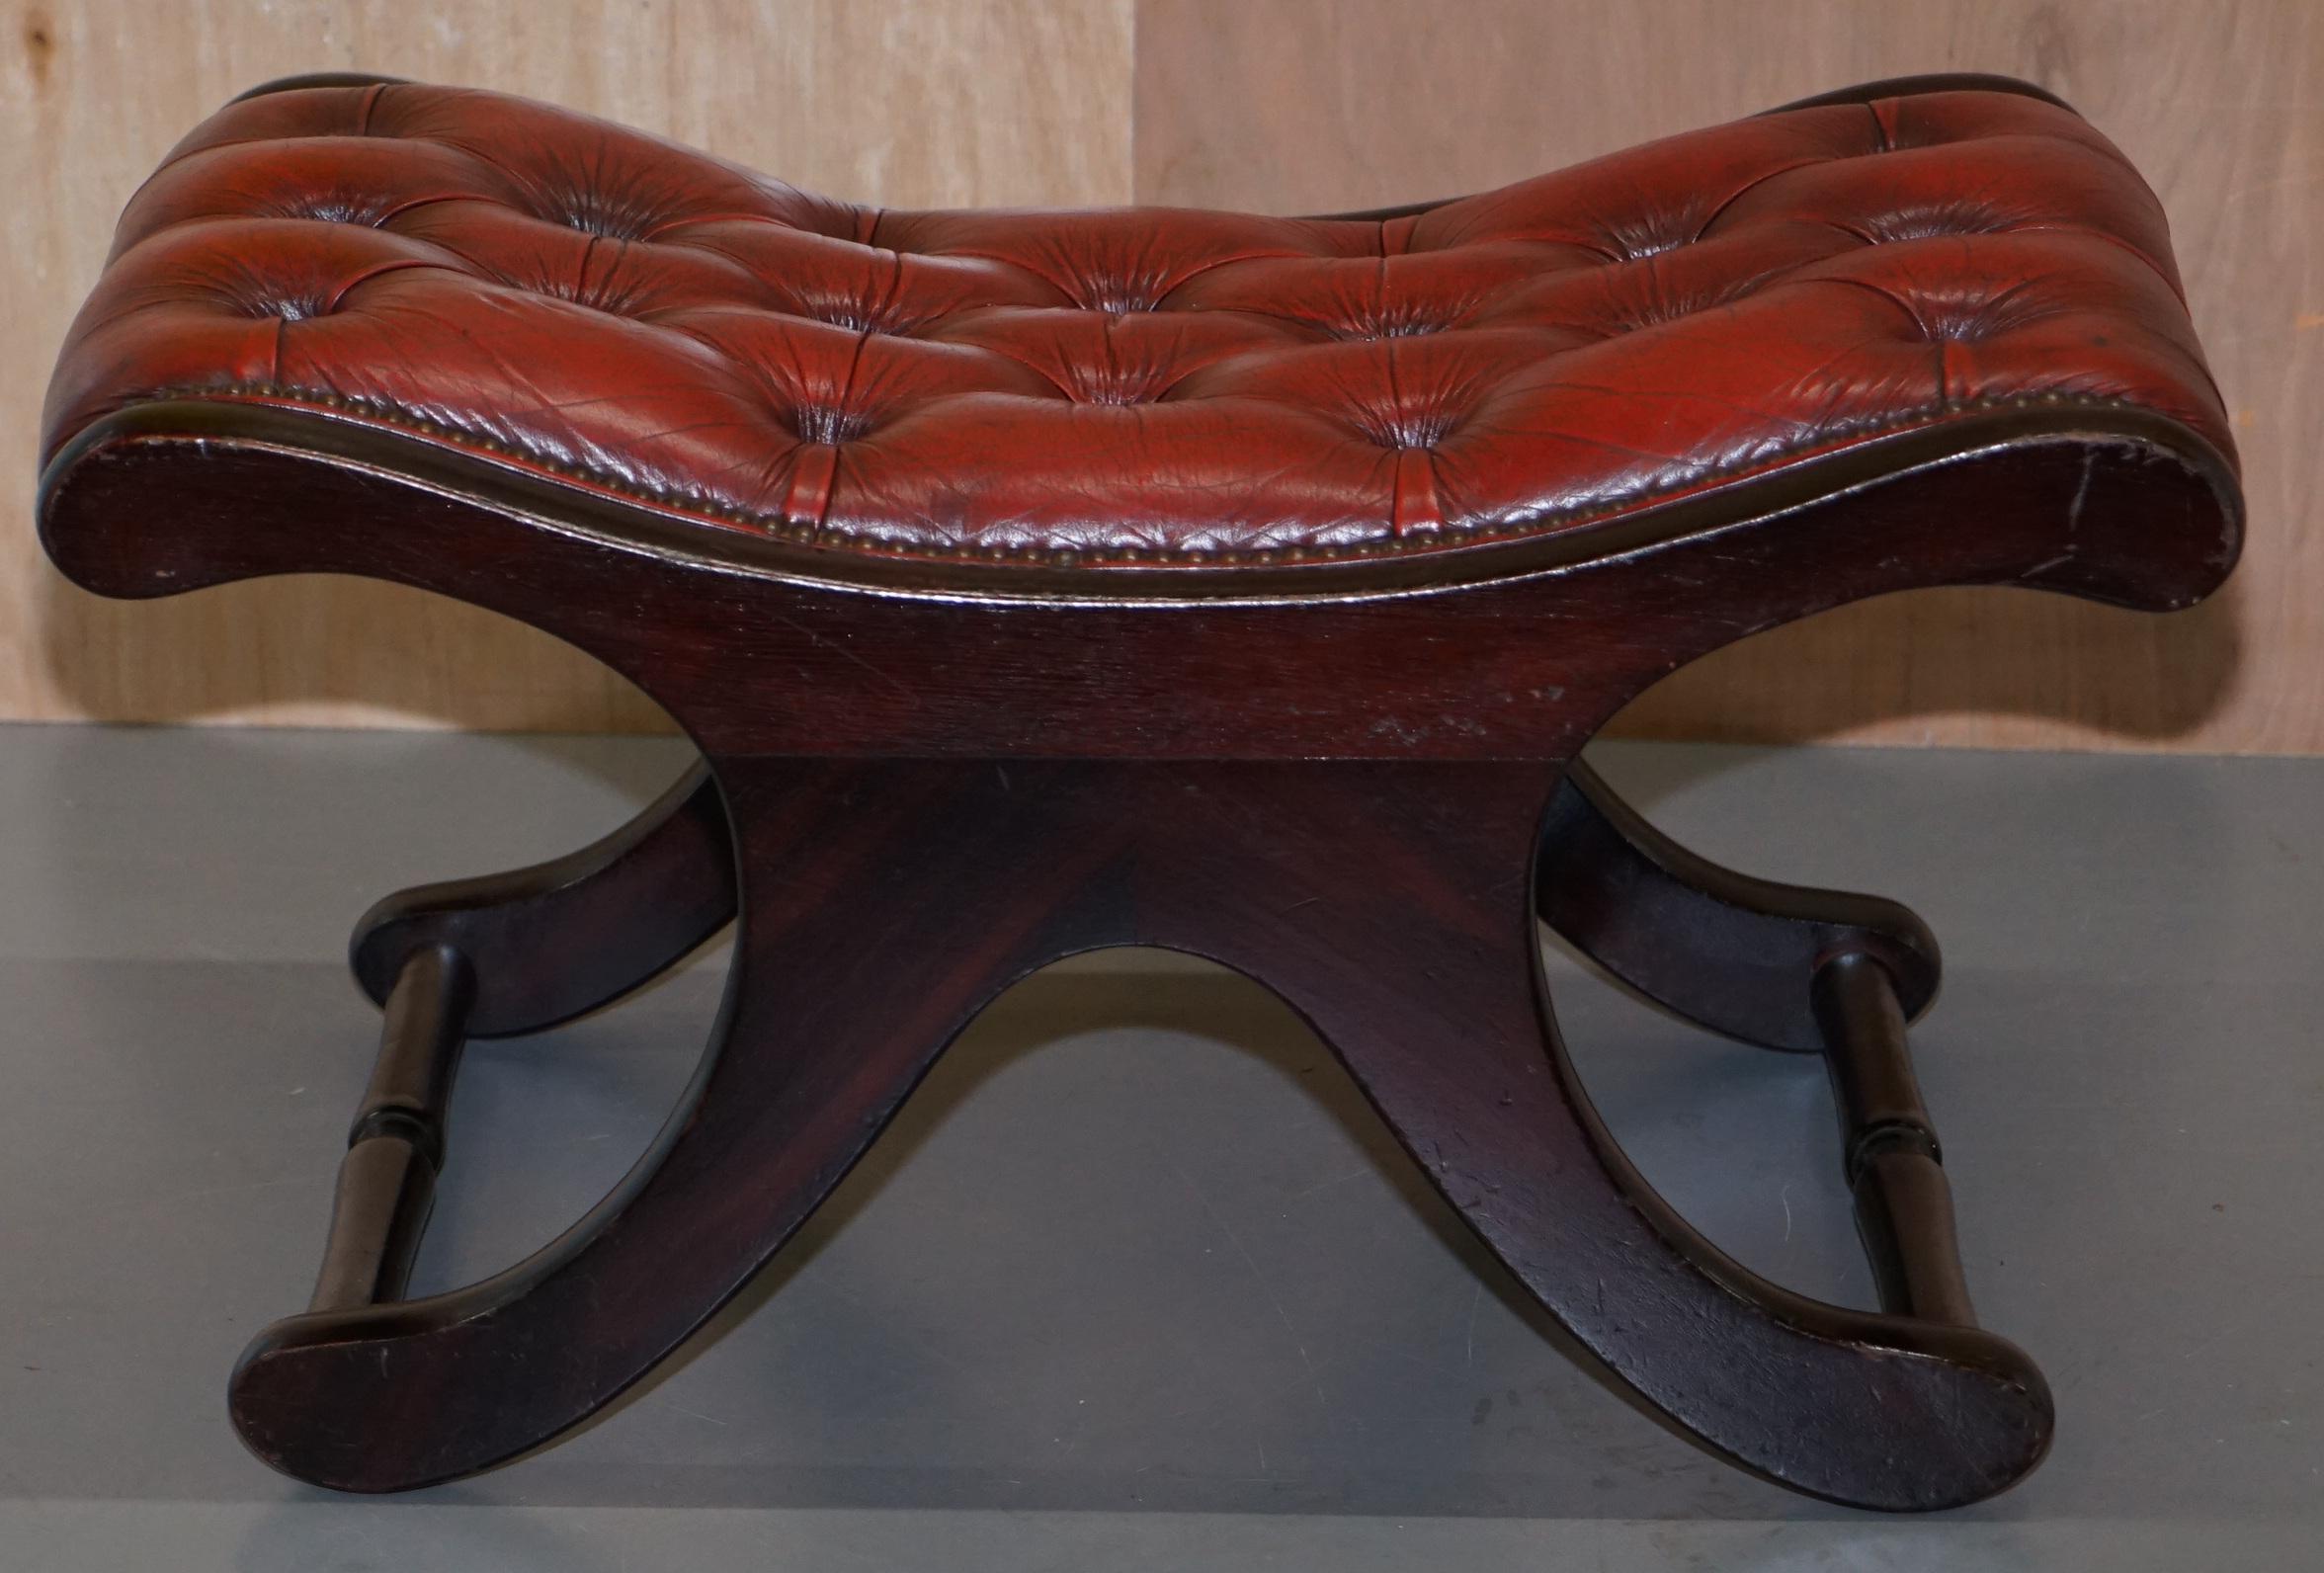 Lovely Chesterfield Oxblood Leather & Mahogany Curved Footstool Footrest Stool 1